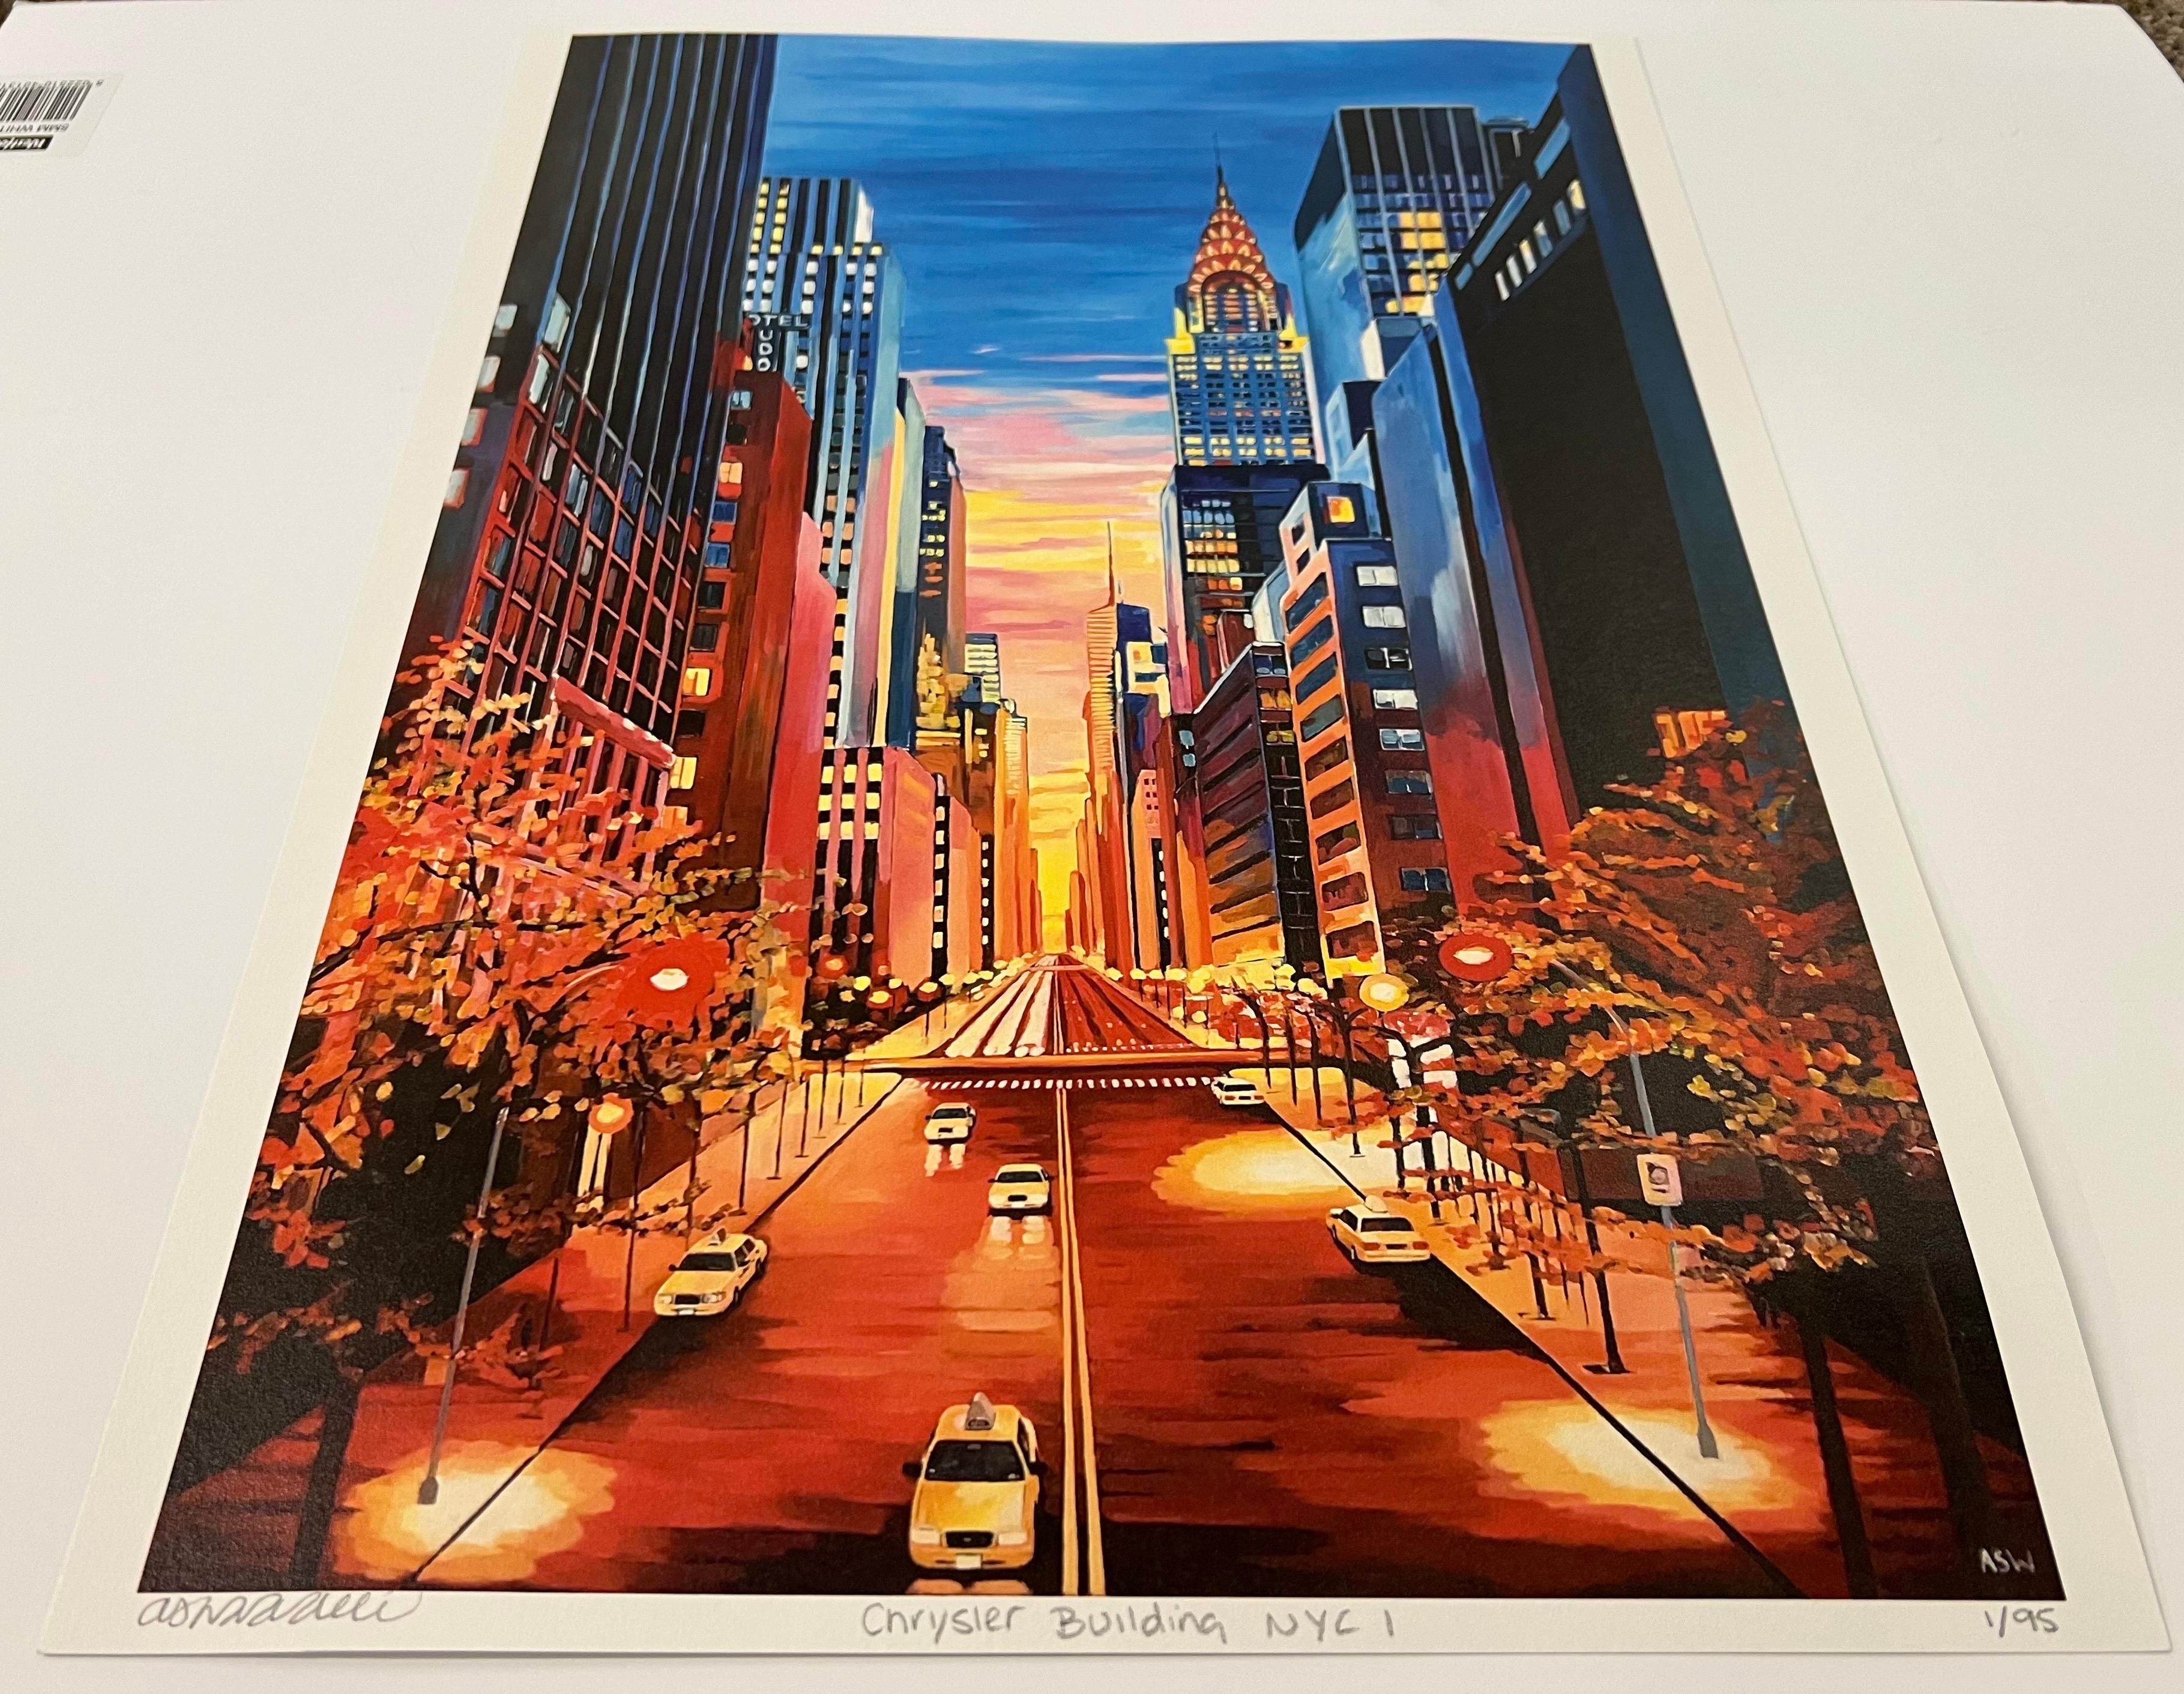 Limited Edition Print of Chrysler Building New York City NYC by Contemporary British Artist, Angela Wakefield. This is a striking, colourful and vibrant depiction of the Chrysler Building on 42nd Street in New York City with a dramatic sunset.